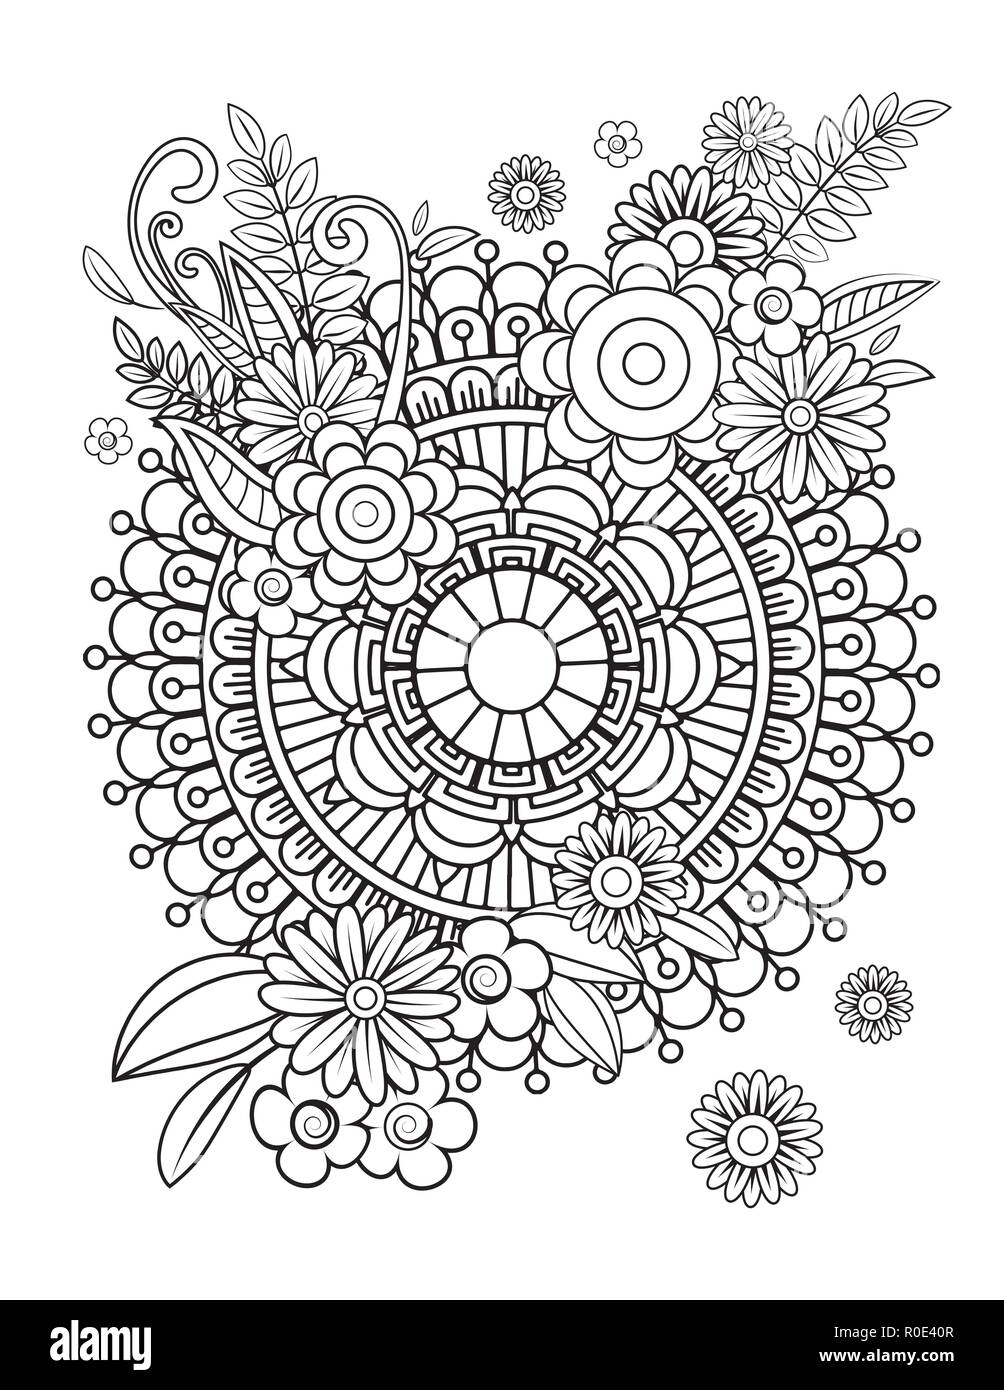 My Love Flowers Mandala Coloring Book For Adults: 50 Pictures to Color on the Theme of Love (Hearts, Animals, Flowers, Trees, Valentine's Day and More Cute Designs) (Adult Coloring Book) [Book]